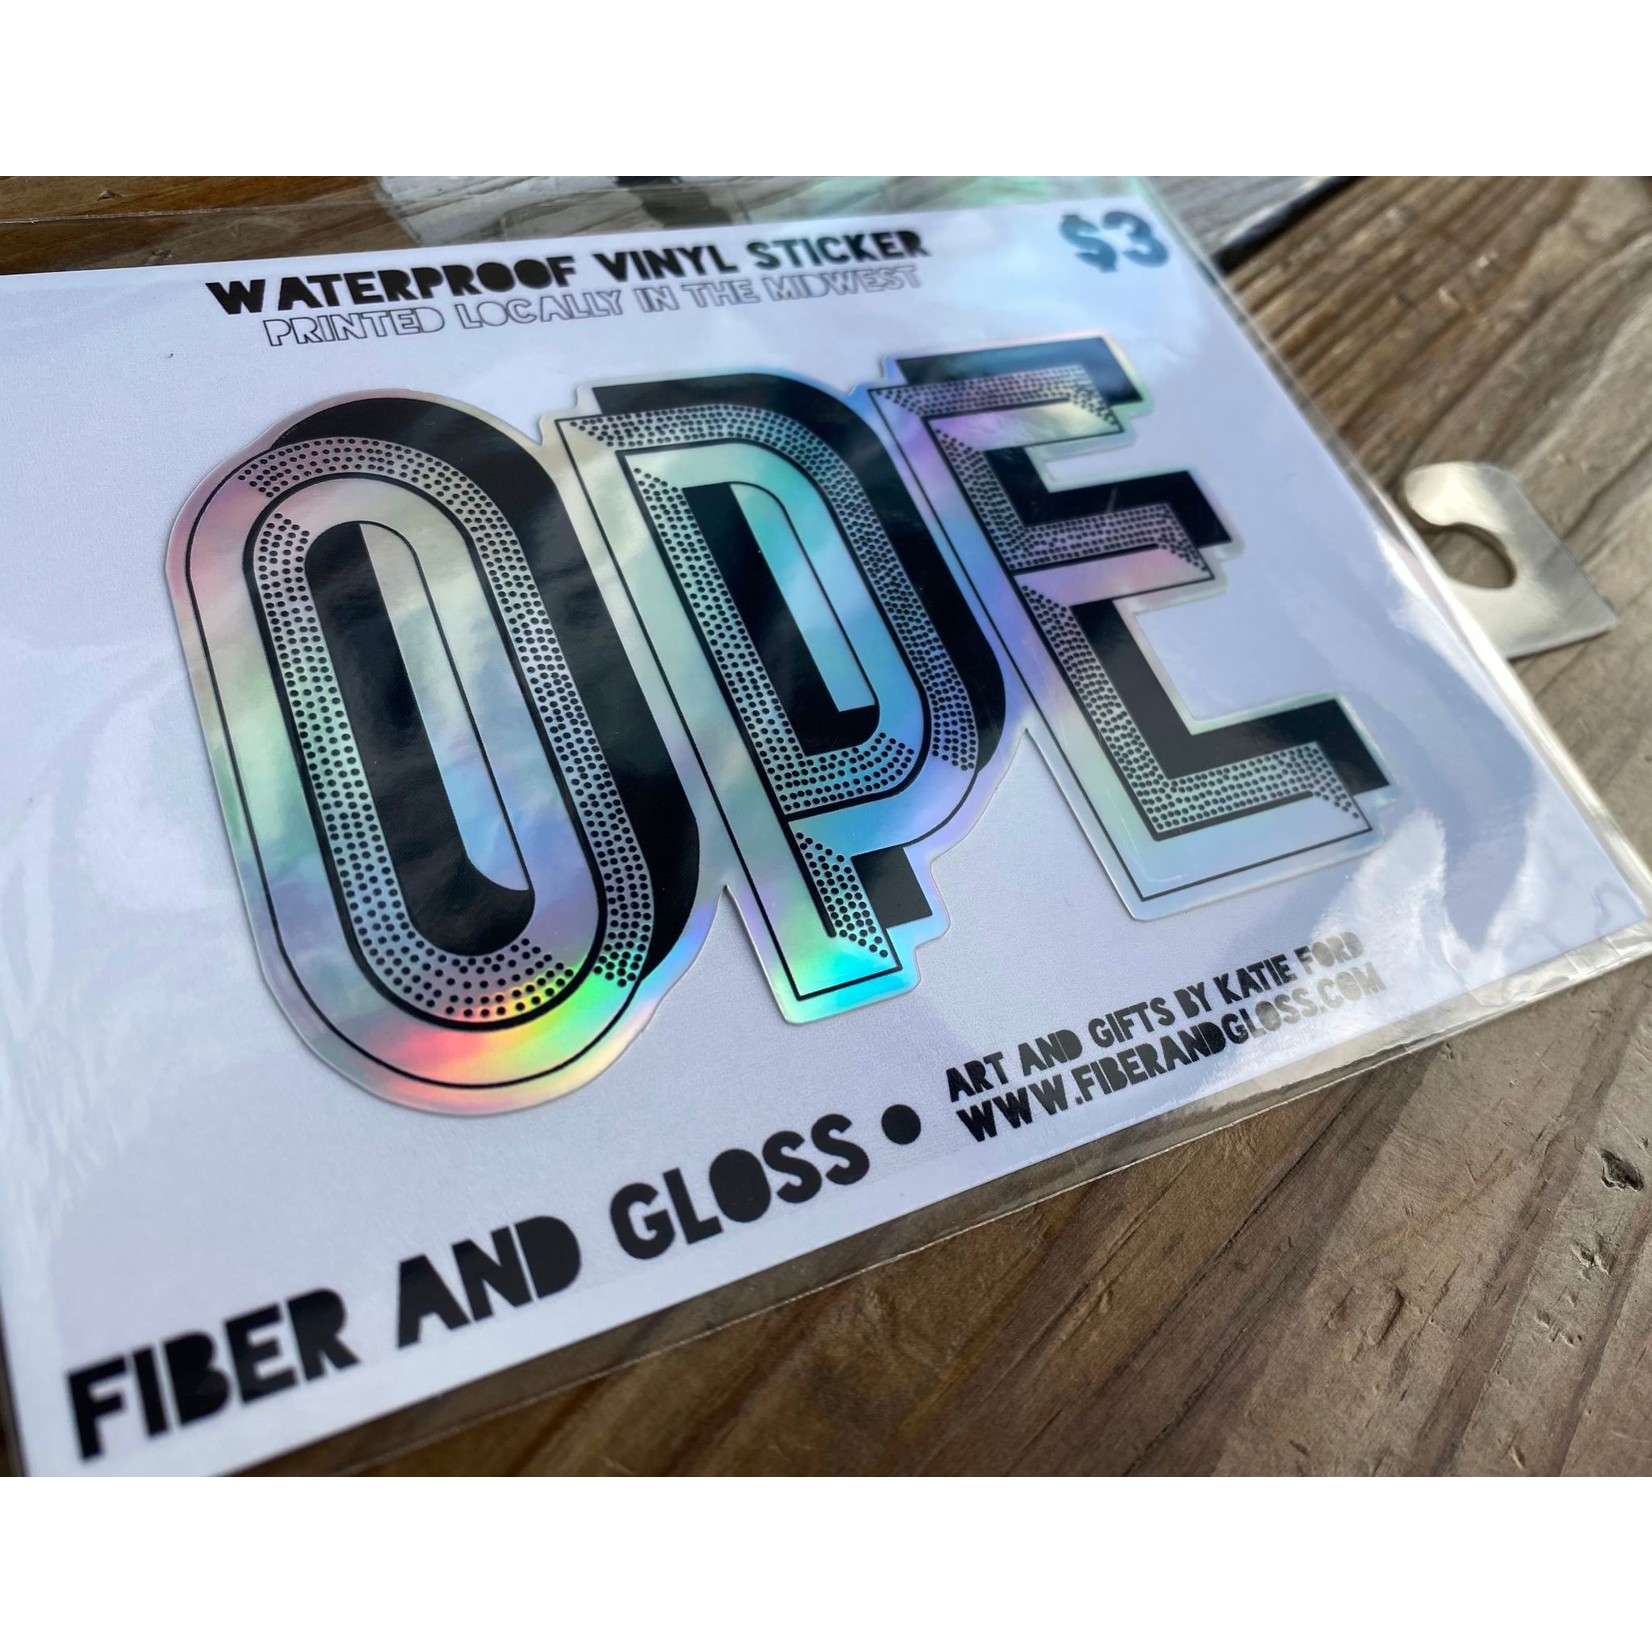 Fiber and Gloss / Whereabouts OPE Holographic Waterproof Vinyl Sticker